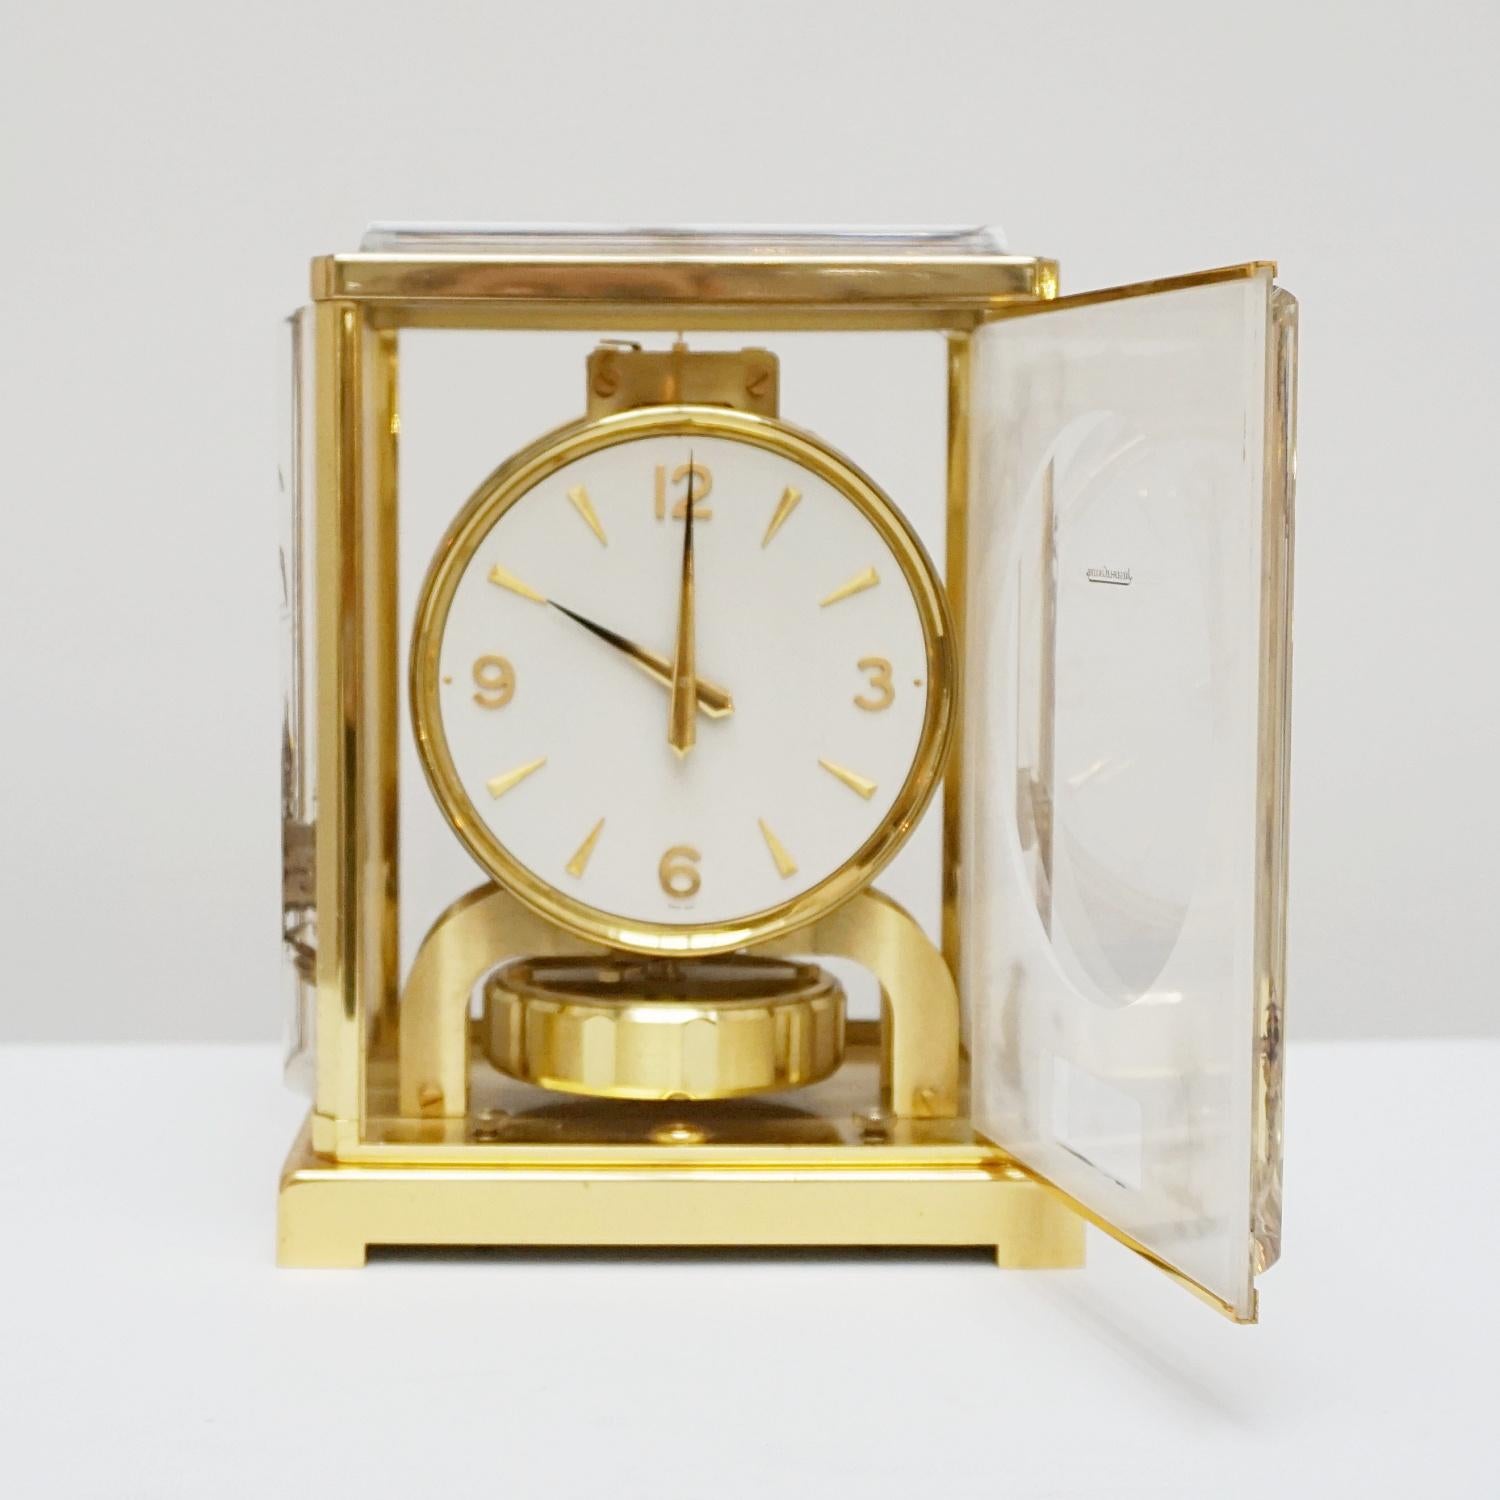 French Midcentury Marina Atmos Clock by Jaeger-LeCoultre